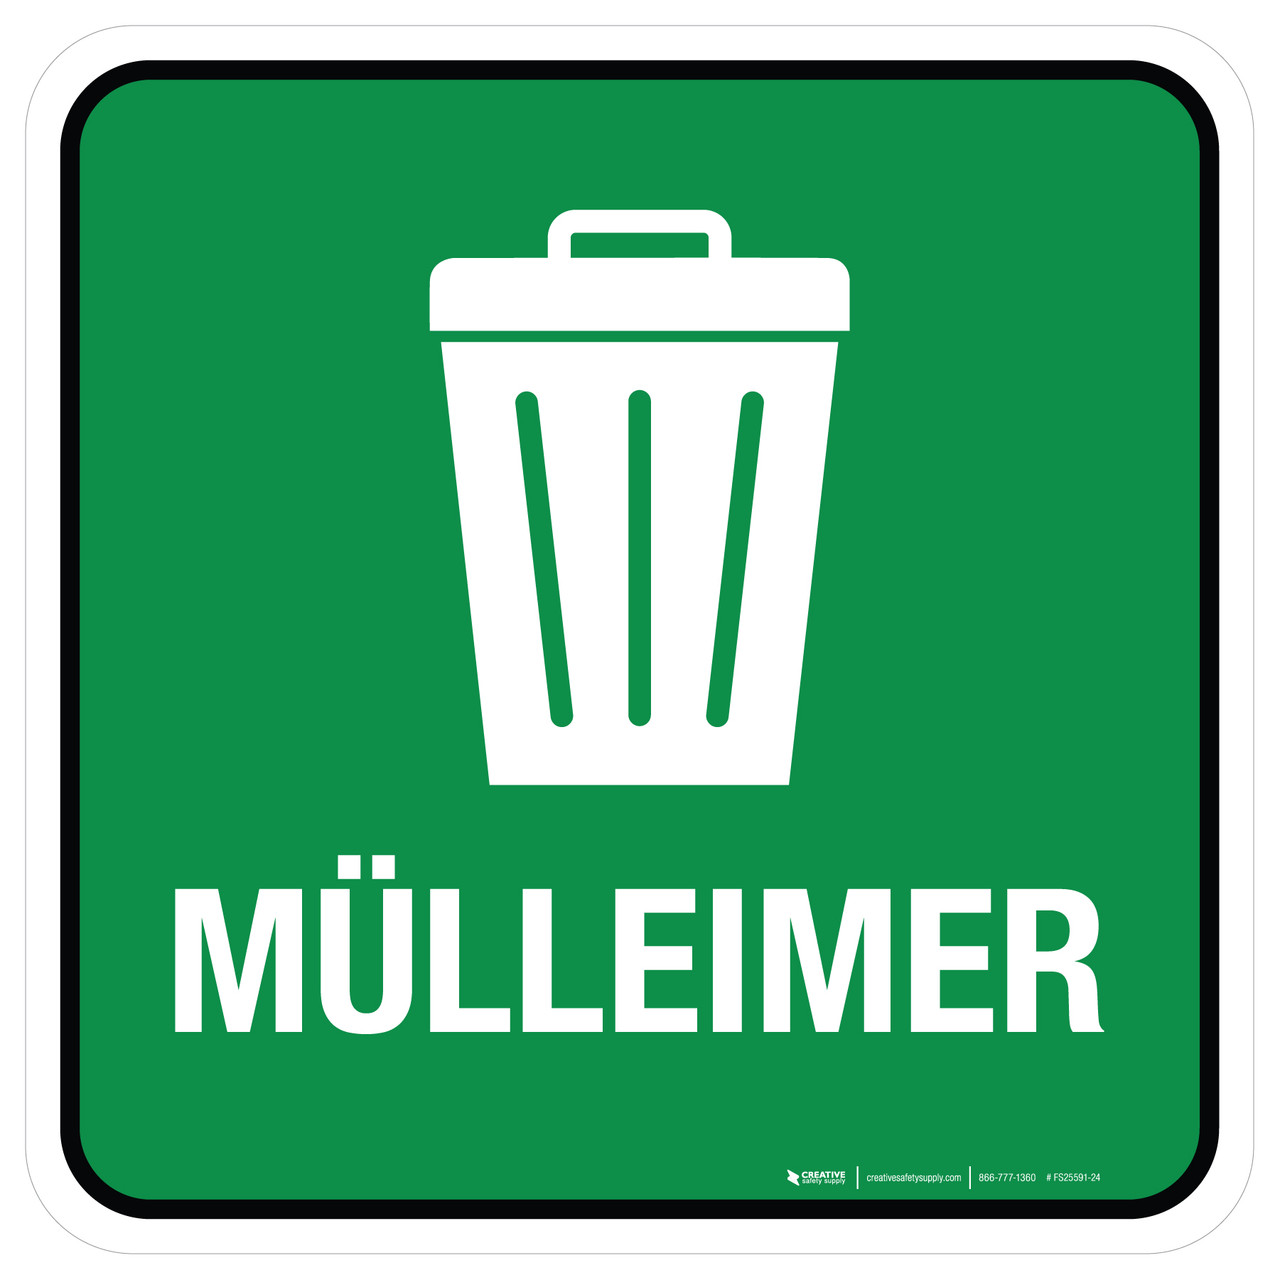 5S MÜLLEIMER (5S Trash Can) Square German - Floor Sign